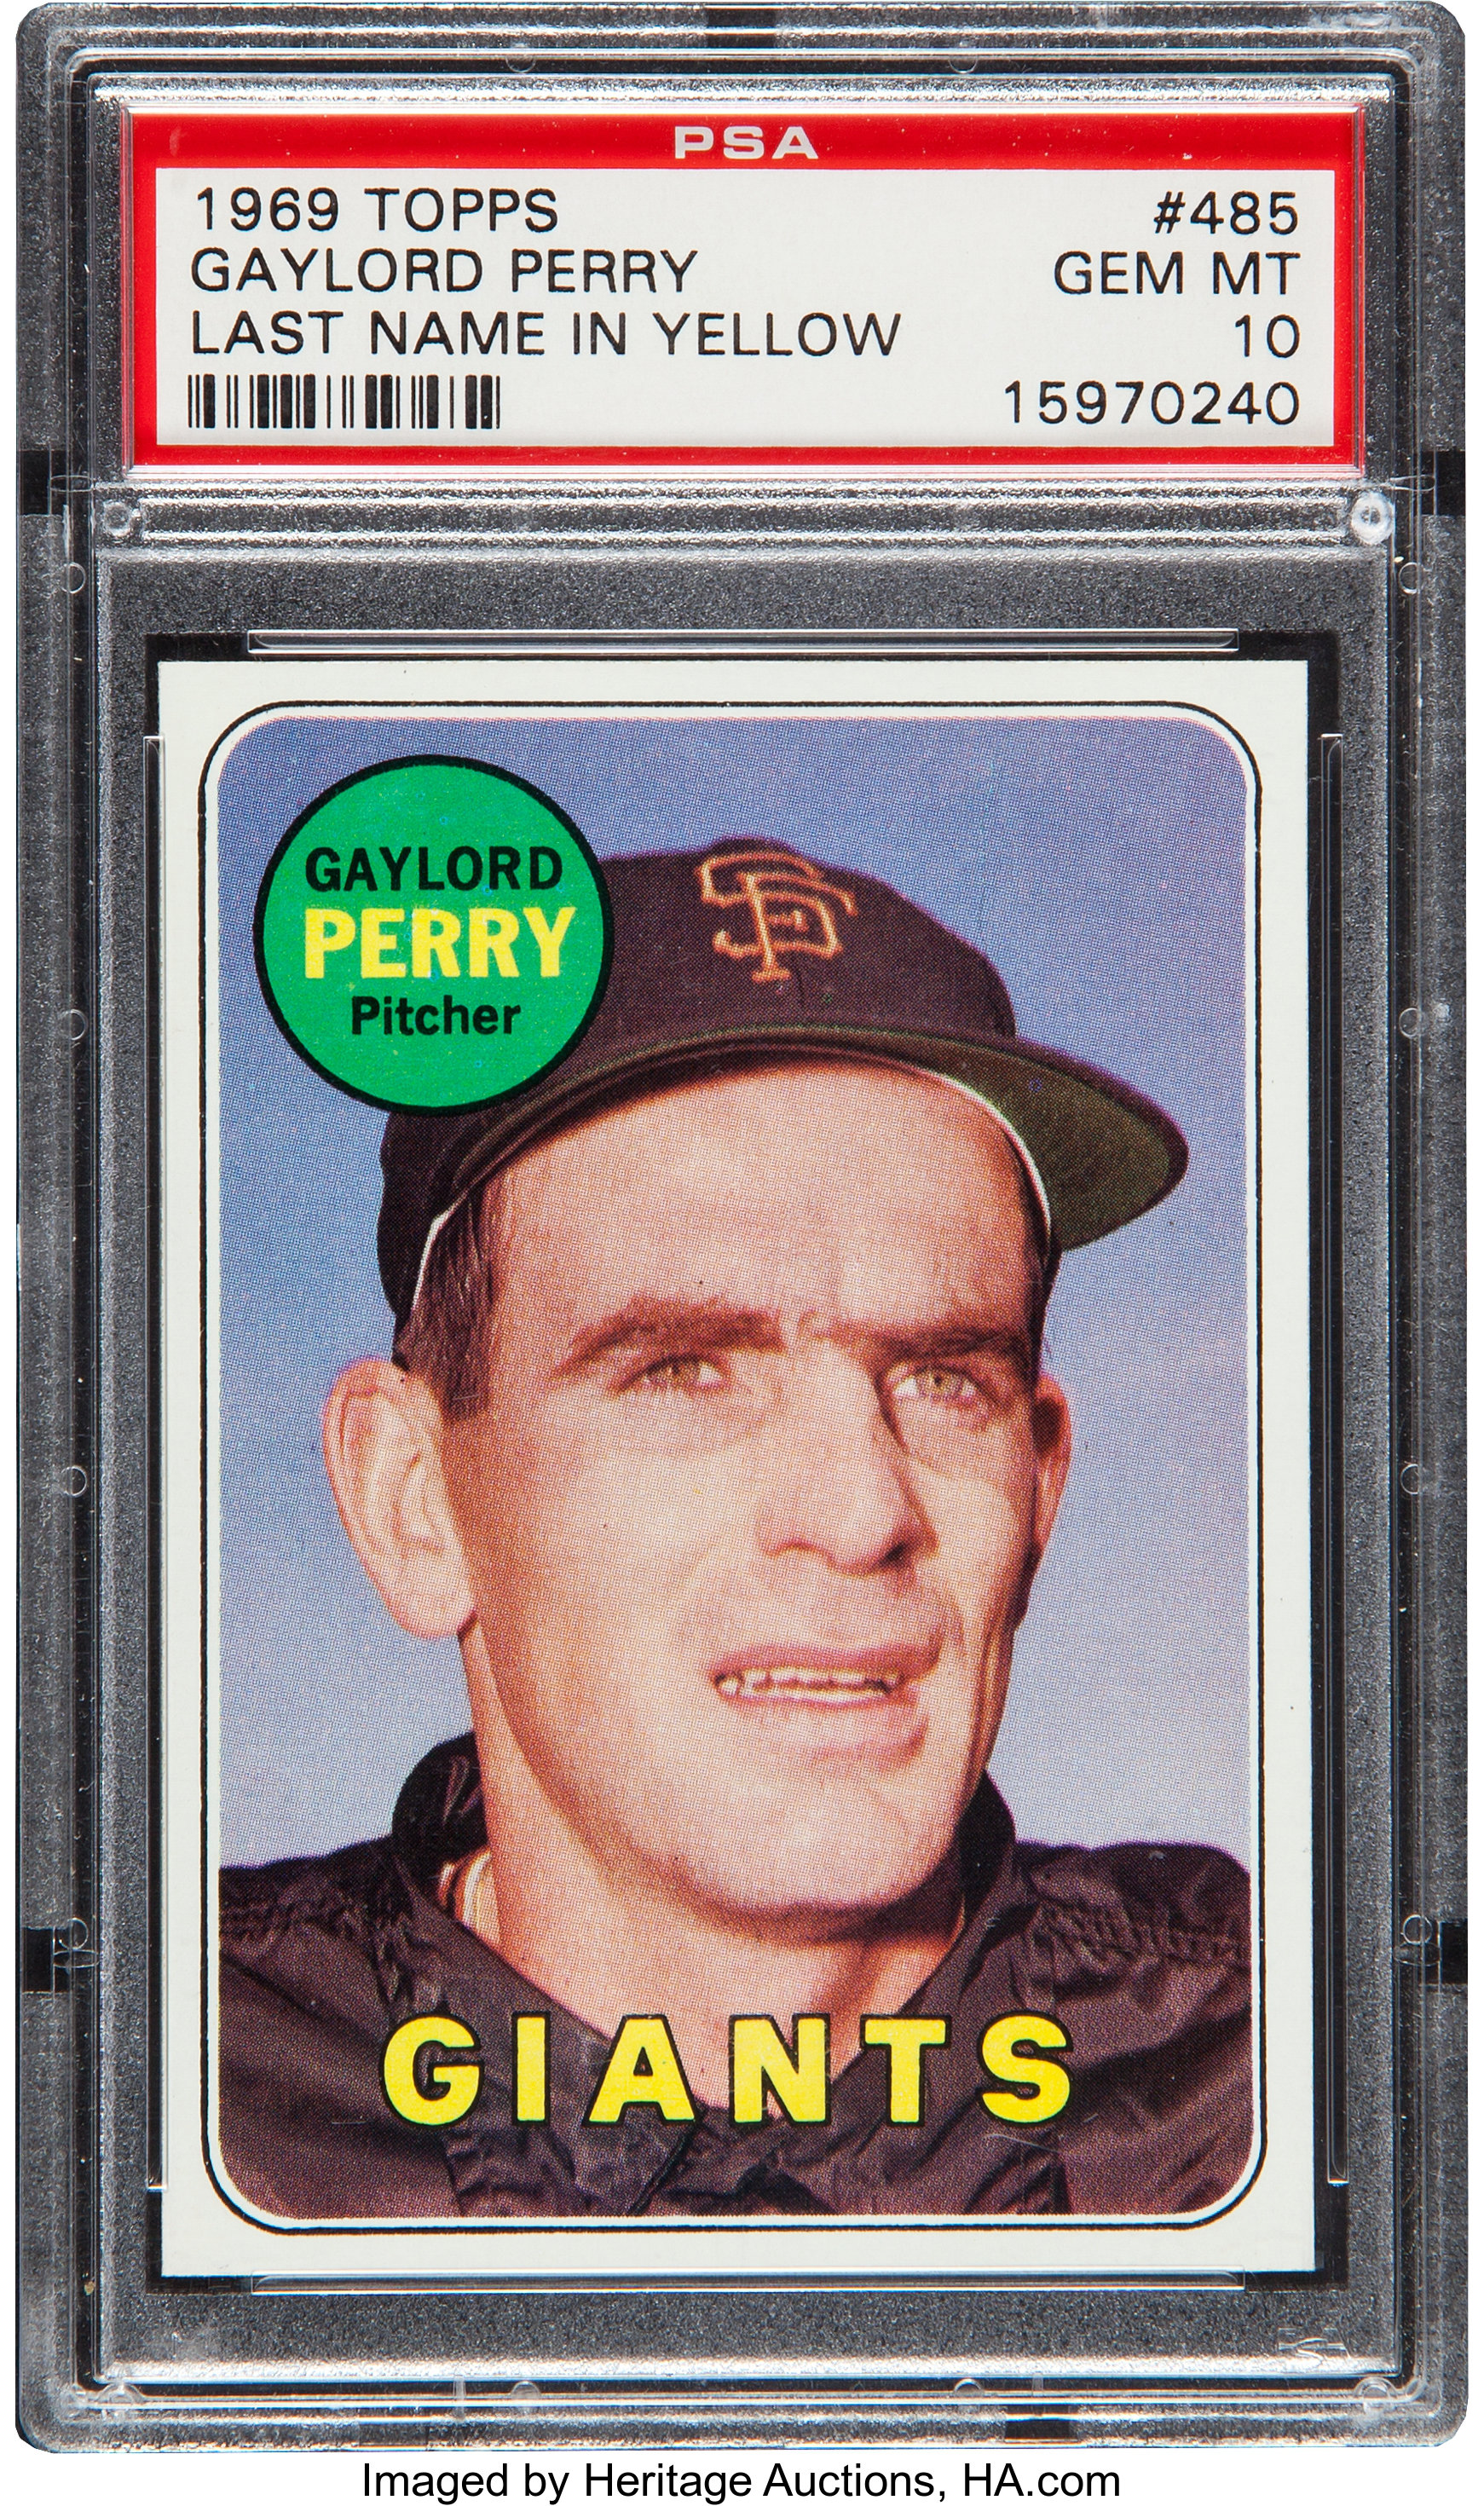 Cards That Never Were: 1980 Topps Gaylord Perry